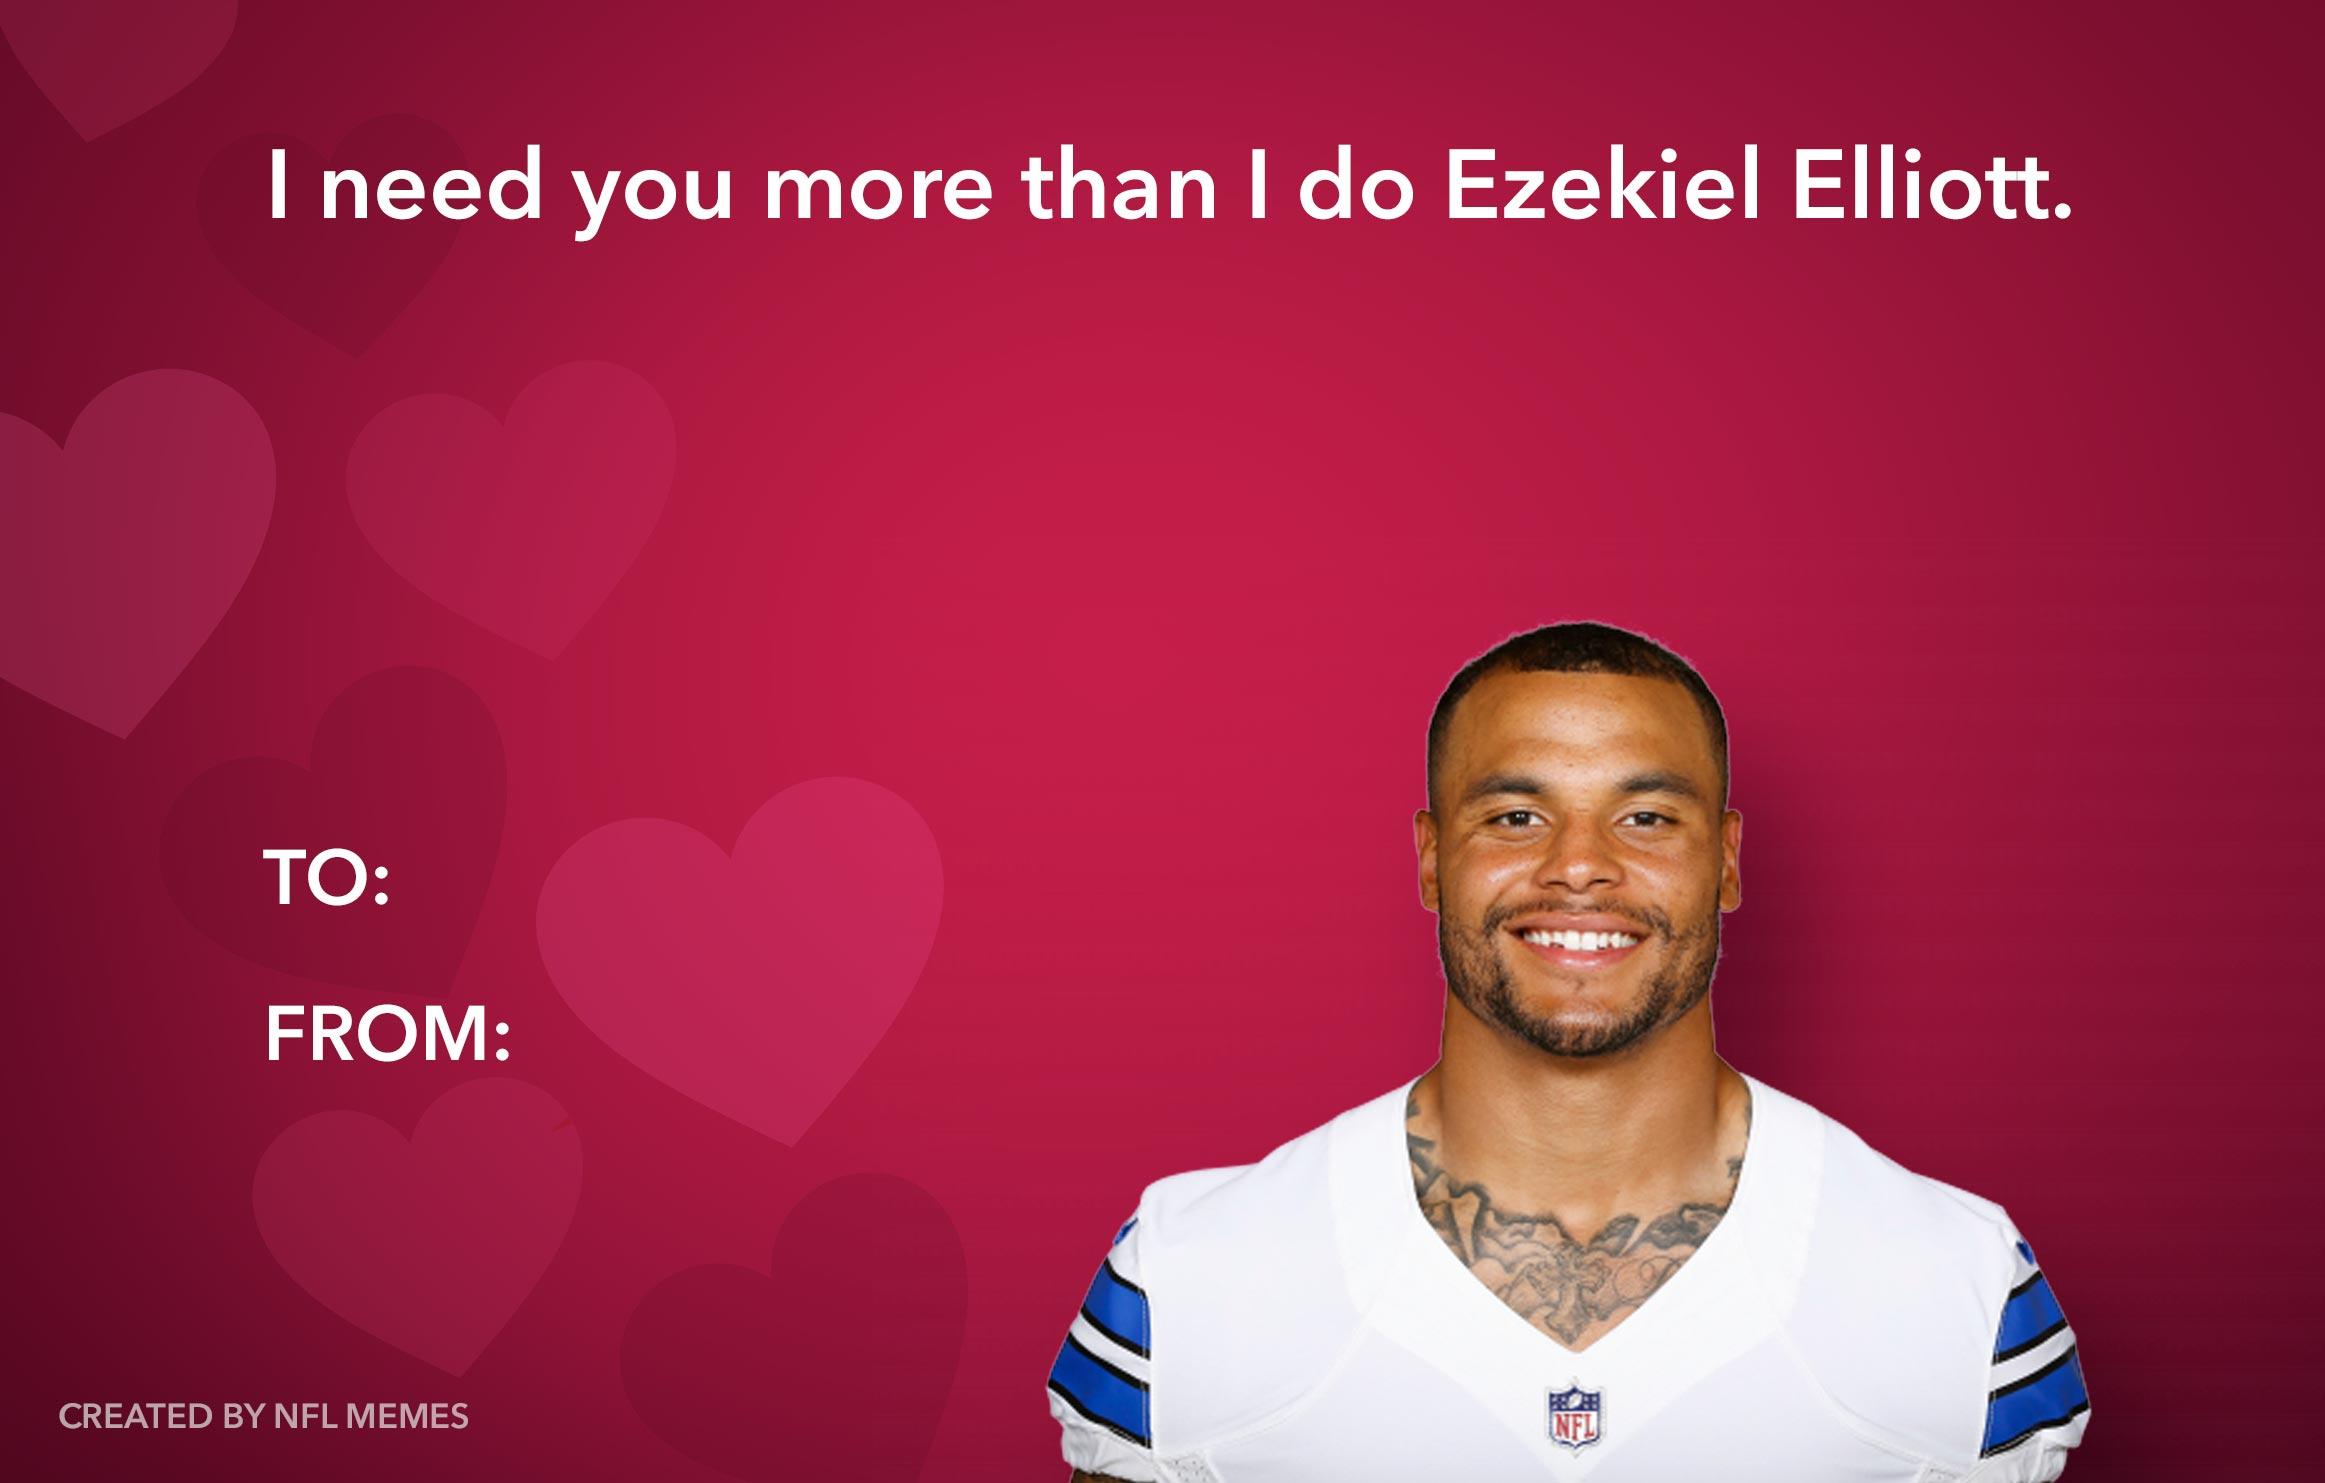 Here’s This Year’s Batch Of Hilarious NFL-Themed Valentine’s Day Cards (PICS)2325 x 1483